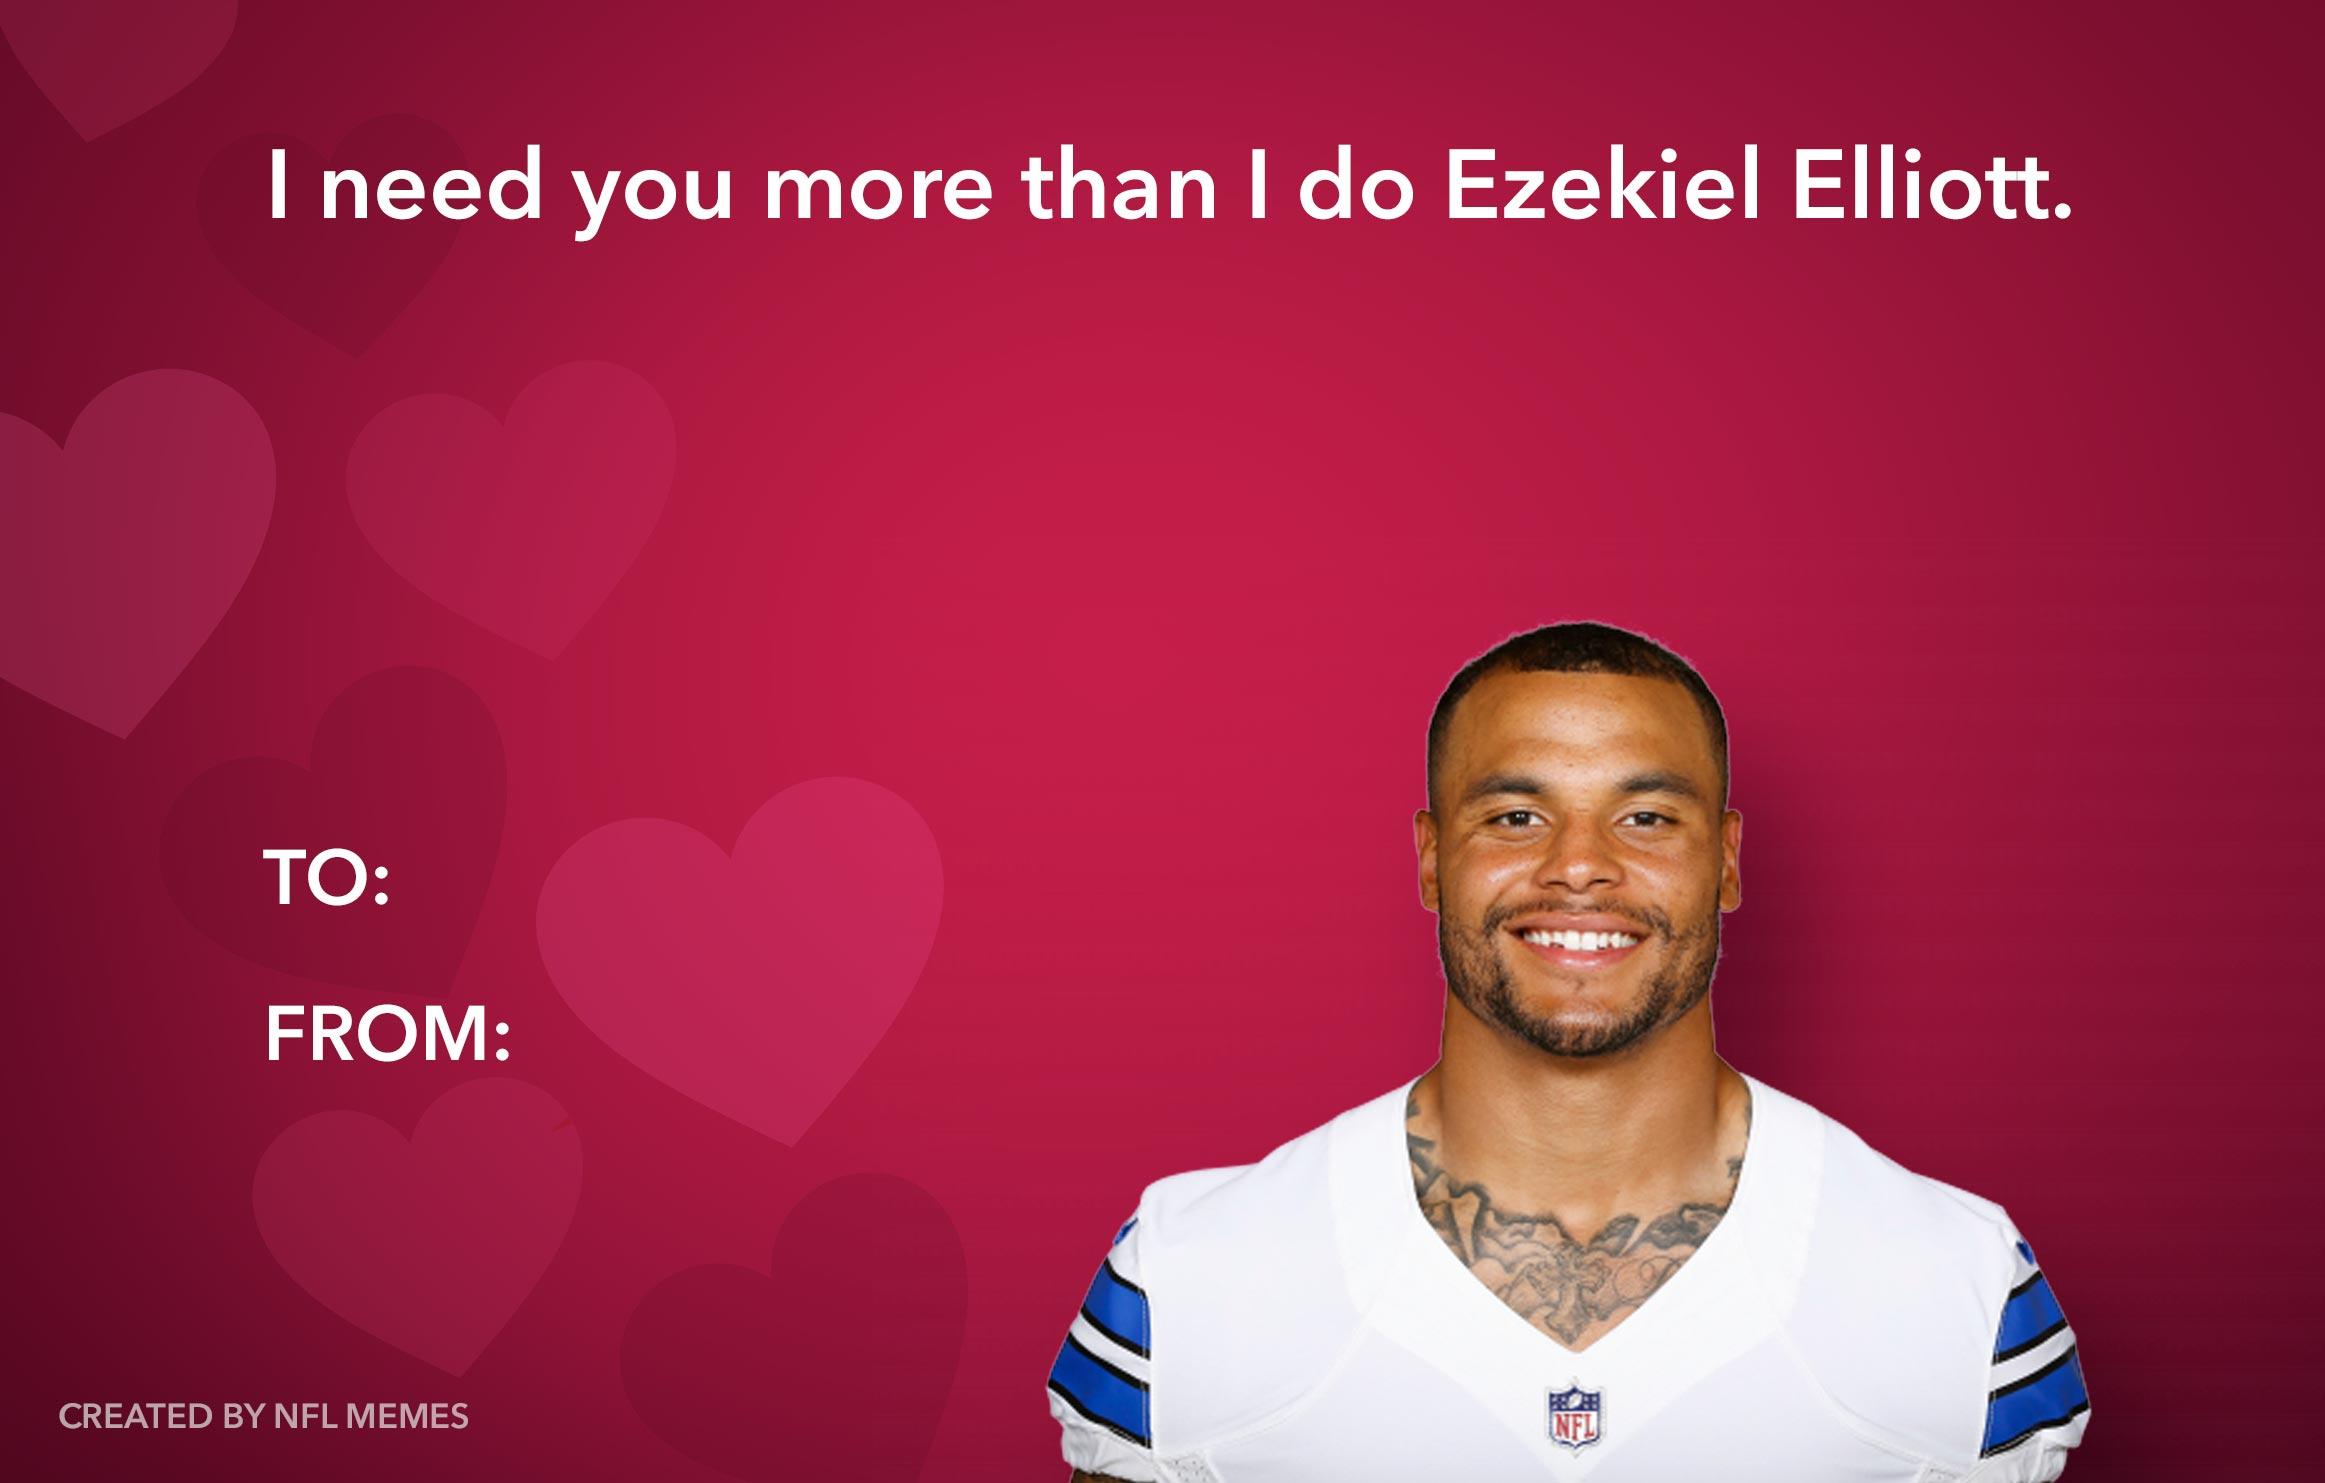 Here’s This Year’s Batch Of Hilarious NFL-Themed Valentine’s Day Cards (PICS)2325 x 1483